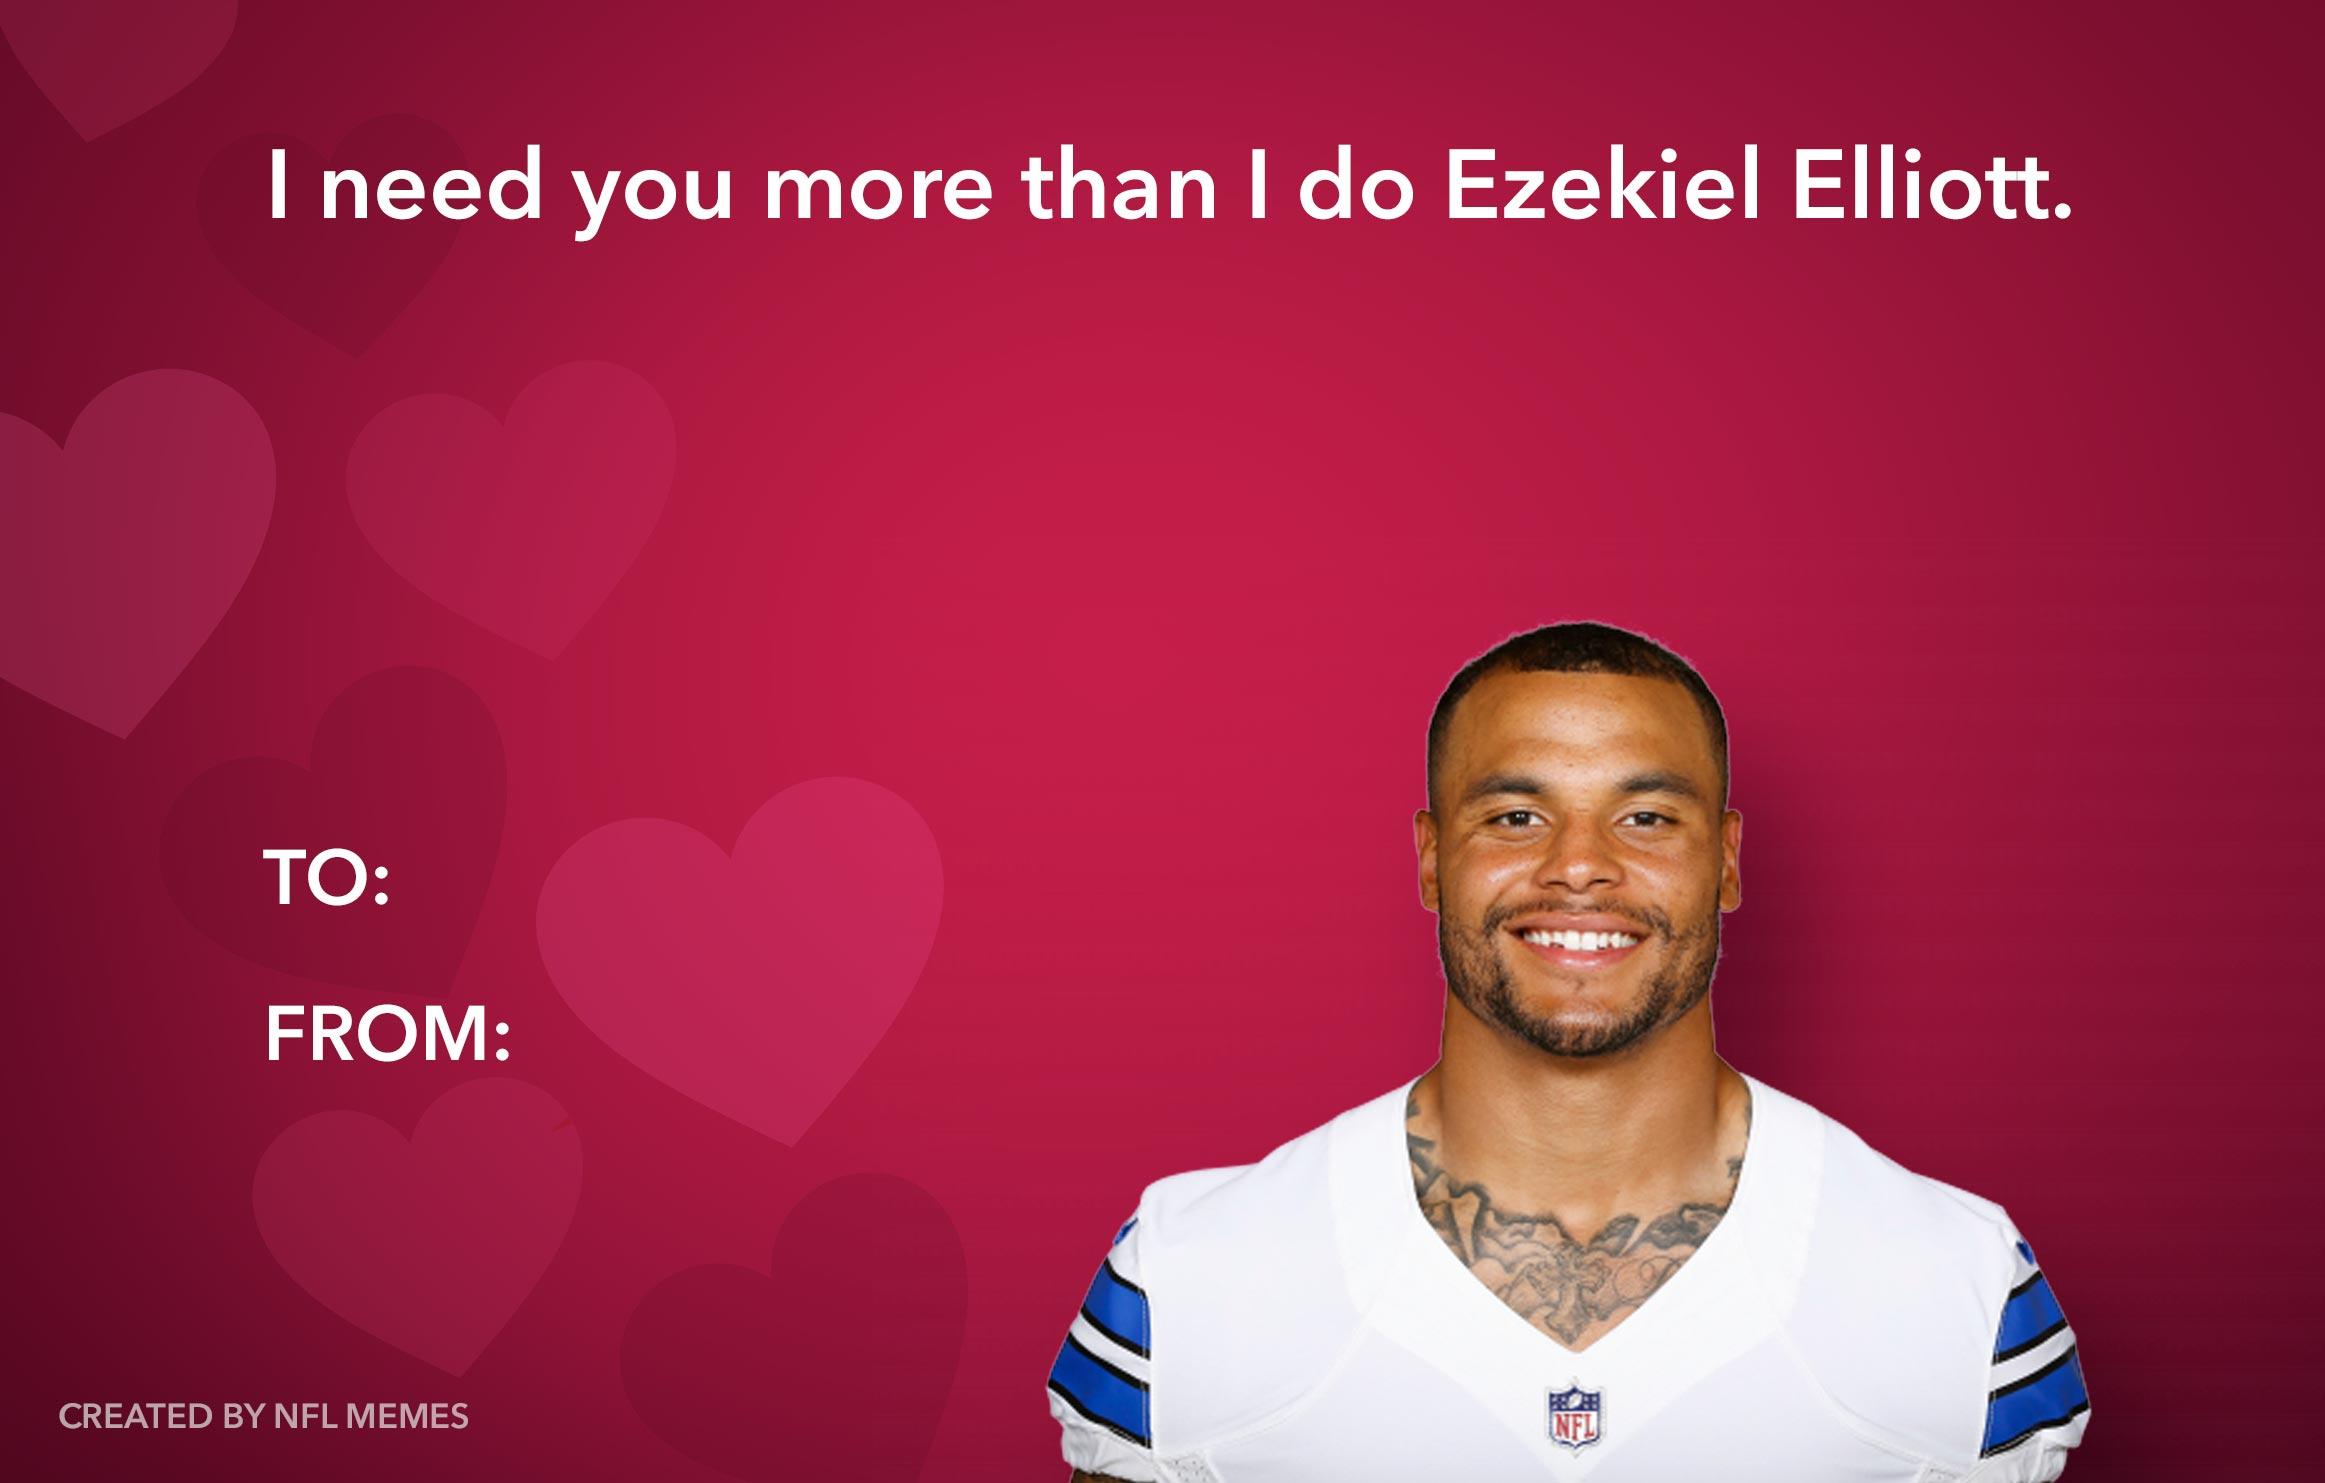 Here’s This Year’s Batch Of Hilarious NFL-Themed Valentine’s Day Cards (PICS)2325 x 1483